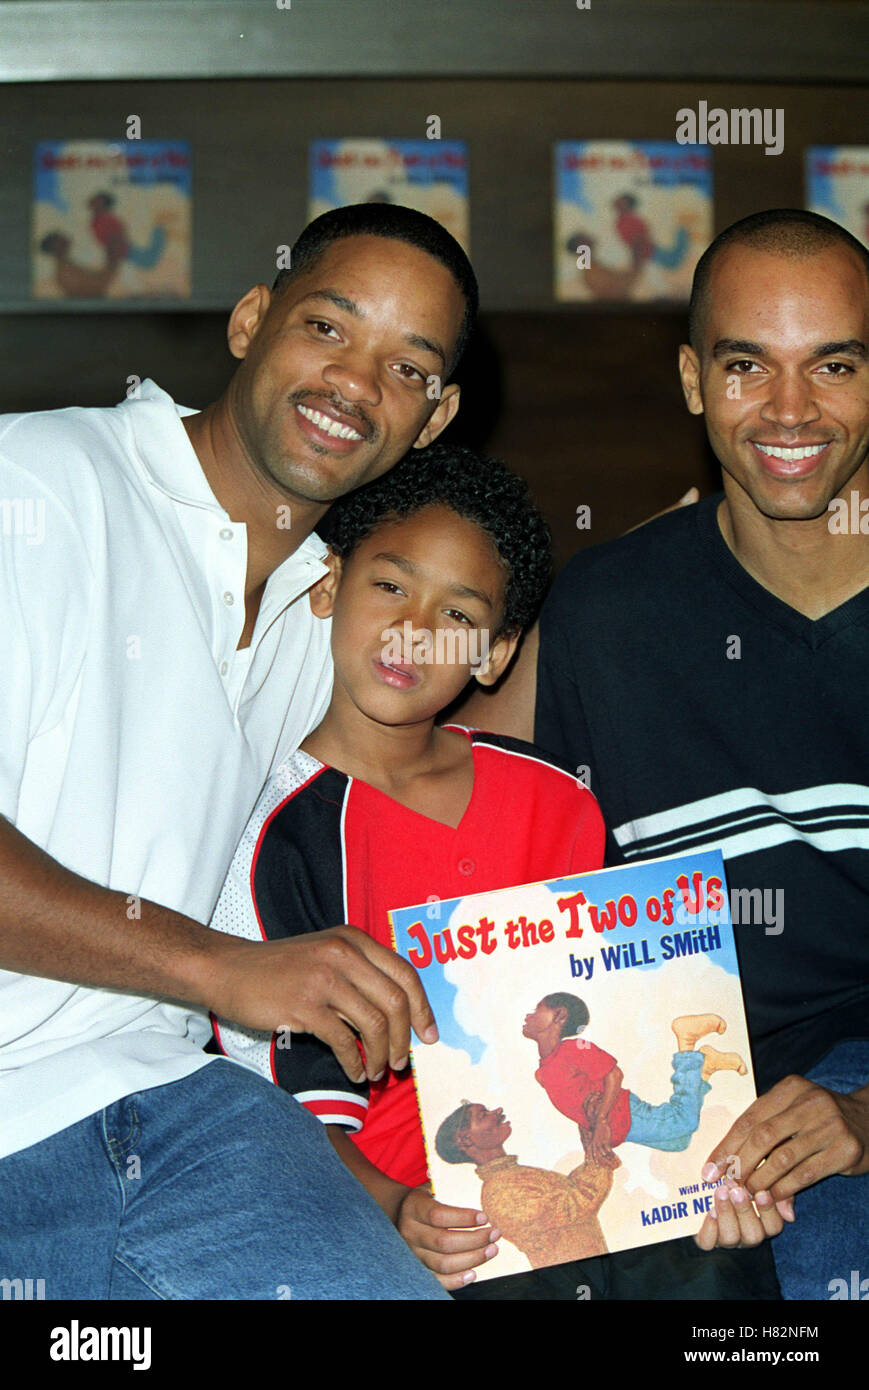 Just the Two of Us book by Will Smith